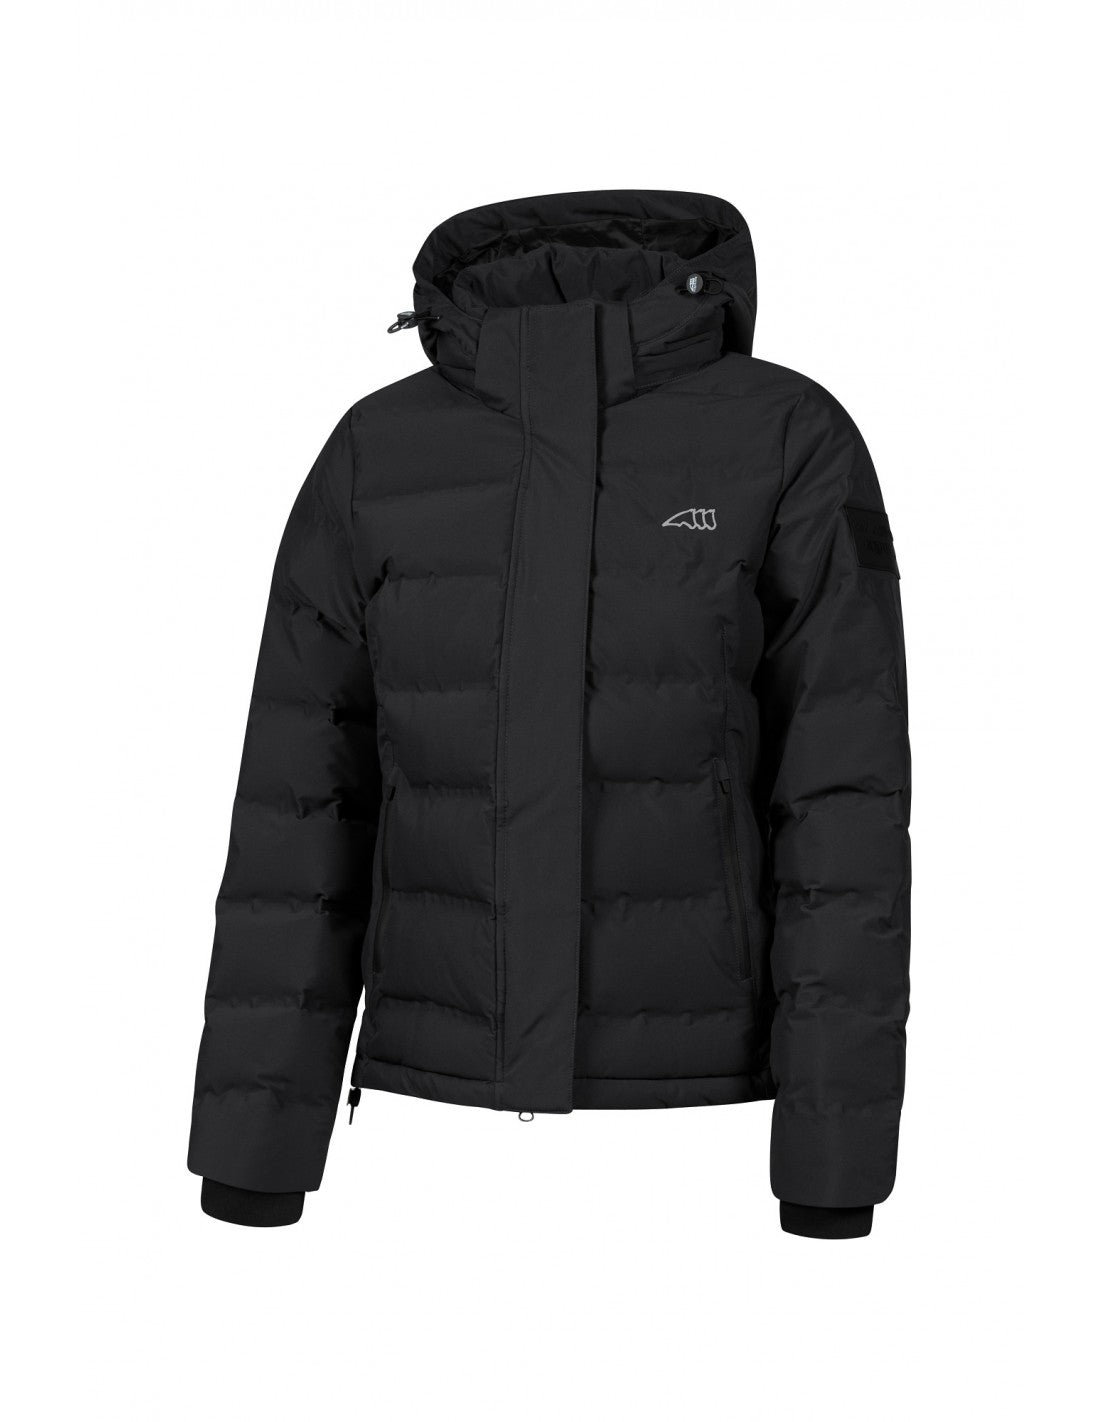 The Equiline Cagec Padded Jacket is practical and Stylish.  This cosy, warm jacket is water repellant and offers ribbing on the cuffs for wind protection. Made with thermal lining and paired with a 2 way front zip, this jacket is sure to keep you warm this winter.  Available in Black &amp; Cobalt Blue.